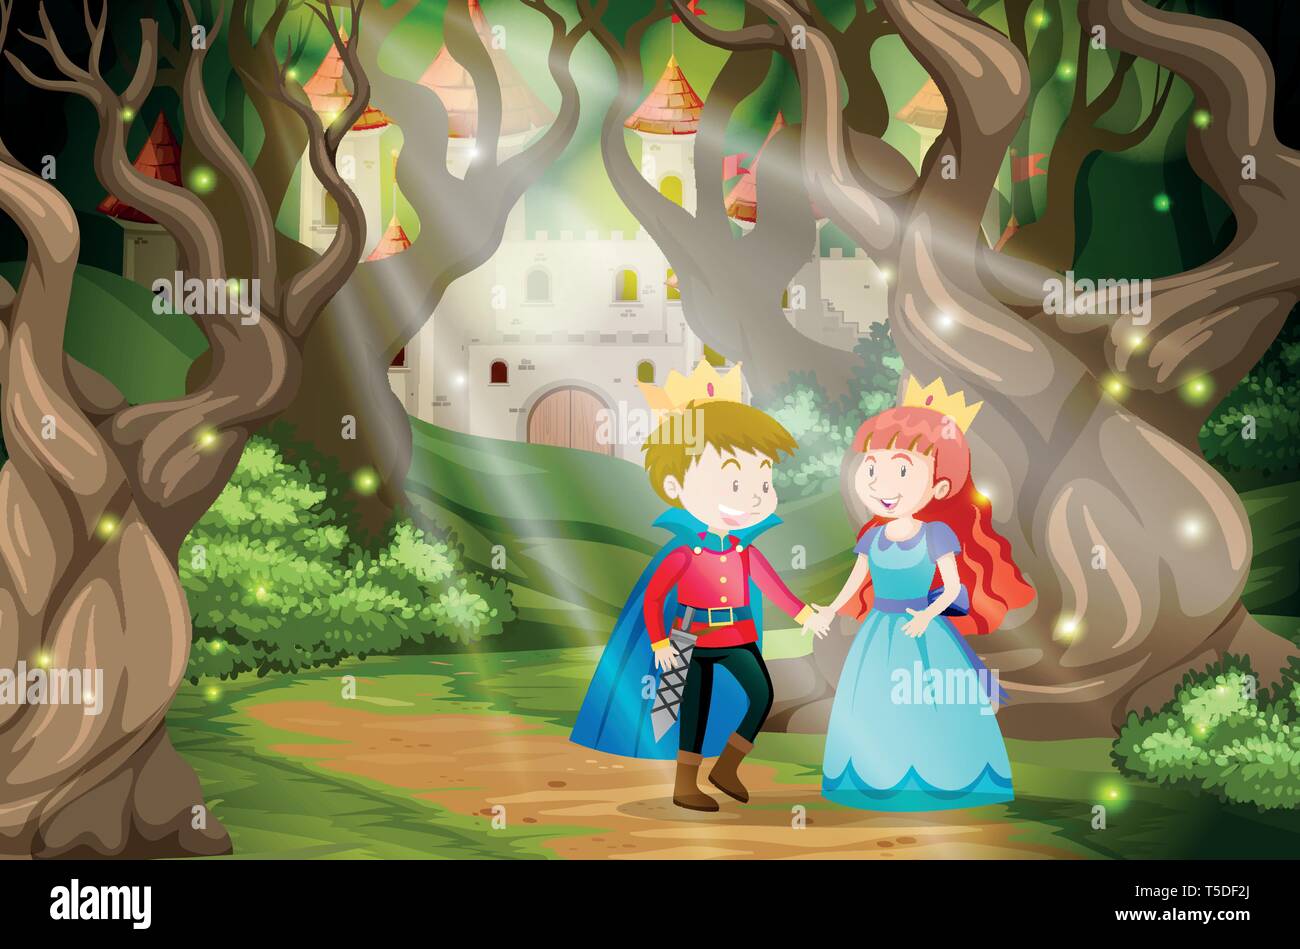 Prince and princess in fantasy world illustration Stock Vector